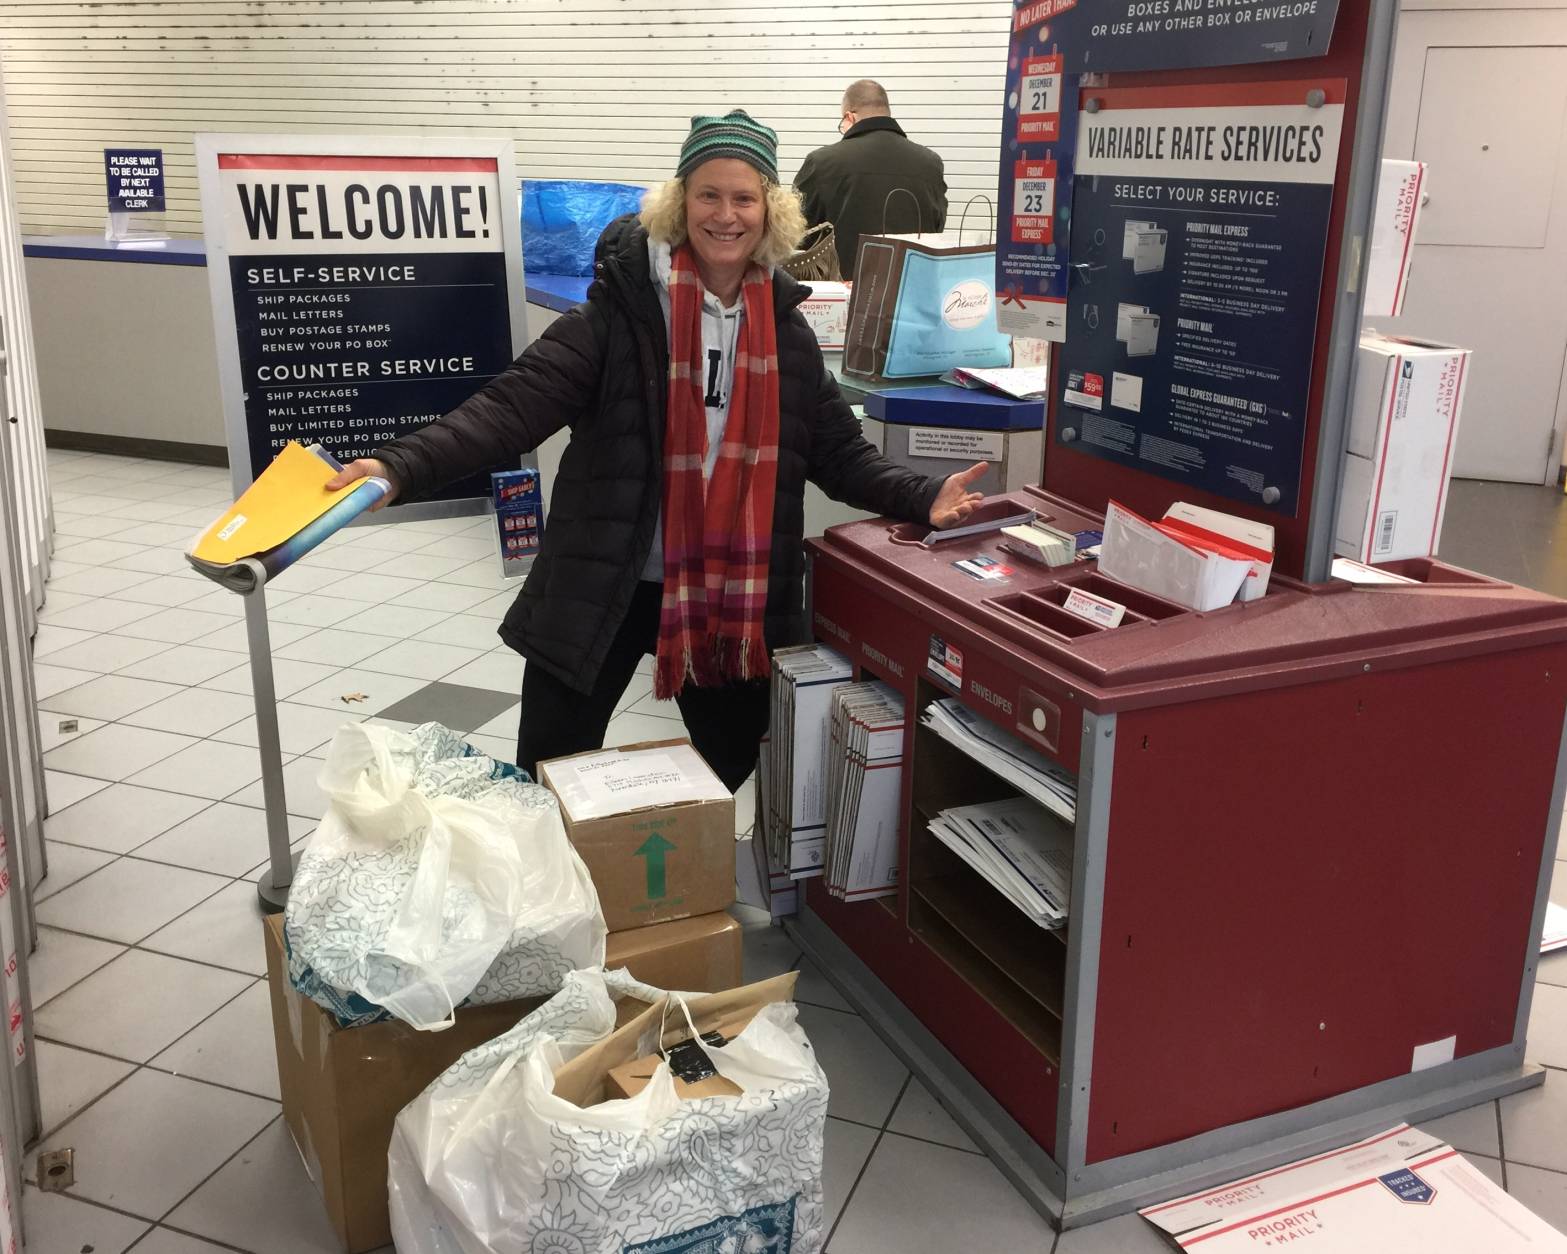 “I have a gazillion packages to mail,” said Nancy Golding, of Northwest D.C., on Monday. Golding was the first in line awaiting the USPS Friendship Station opening on what the Postal Service expects will be the busiest day for mailing holiday cards, letters and packages. (WTOP/Kristi King)